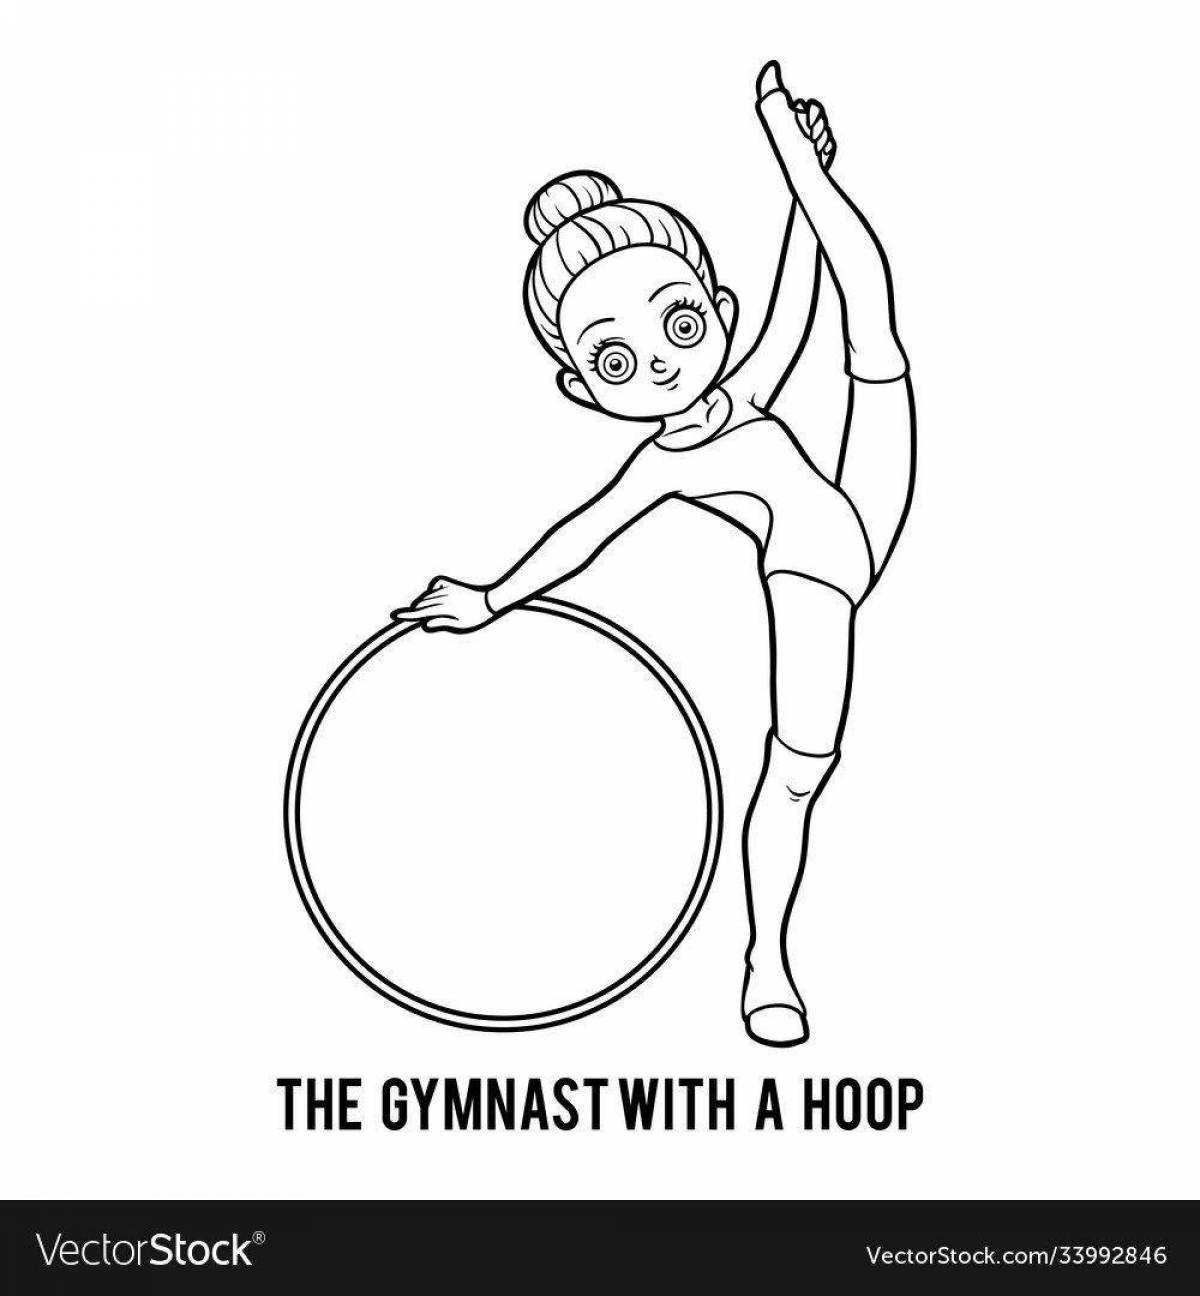 Exciting gymnastic coloring book for kids